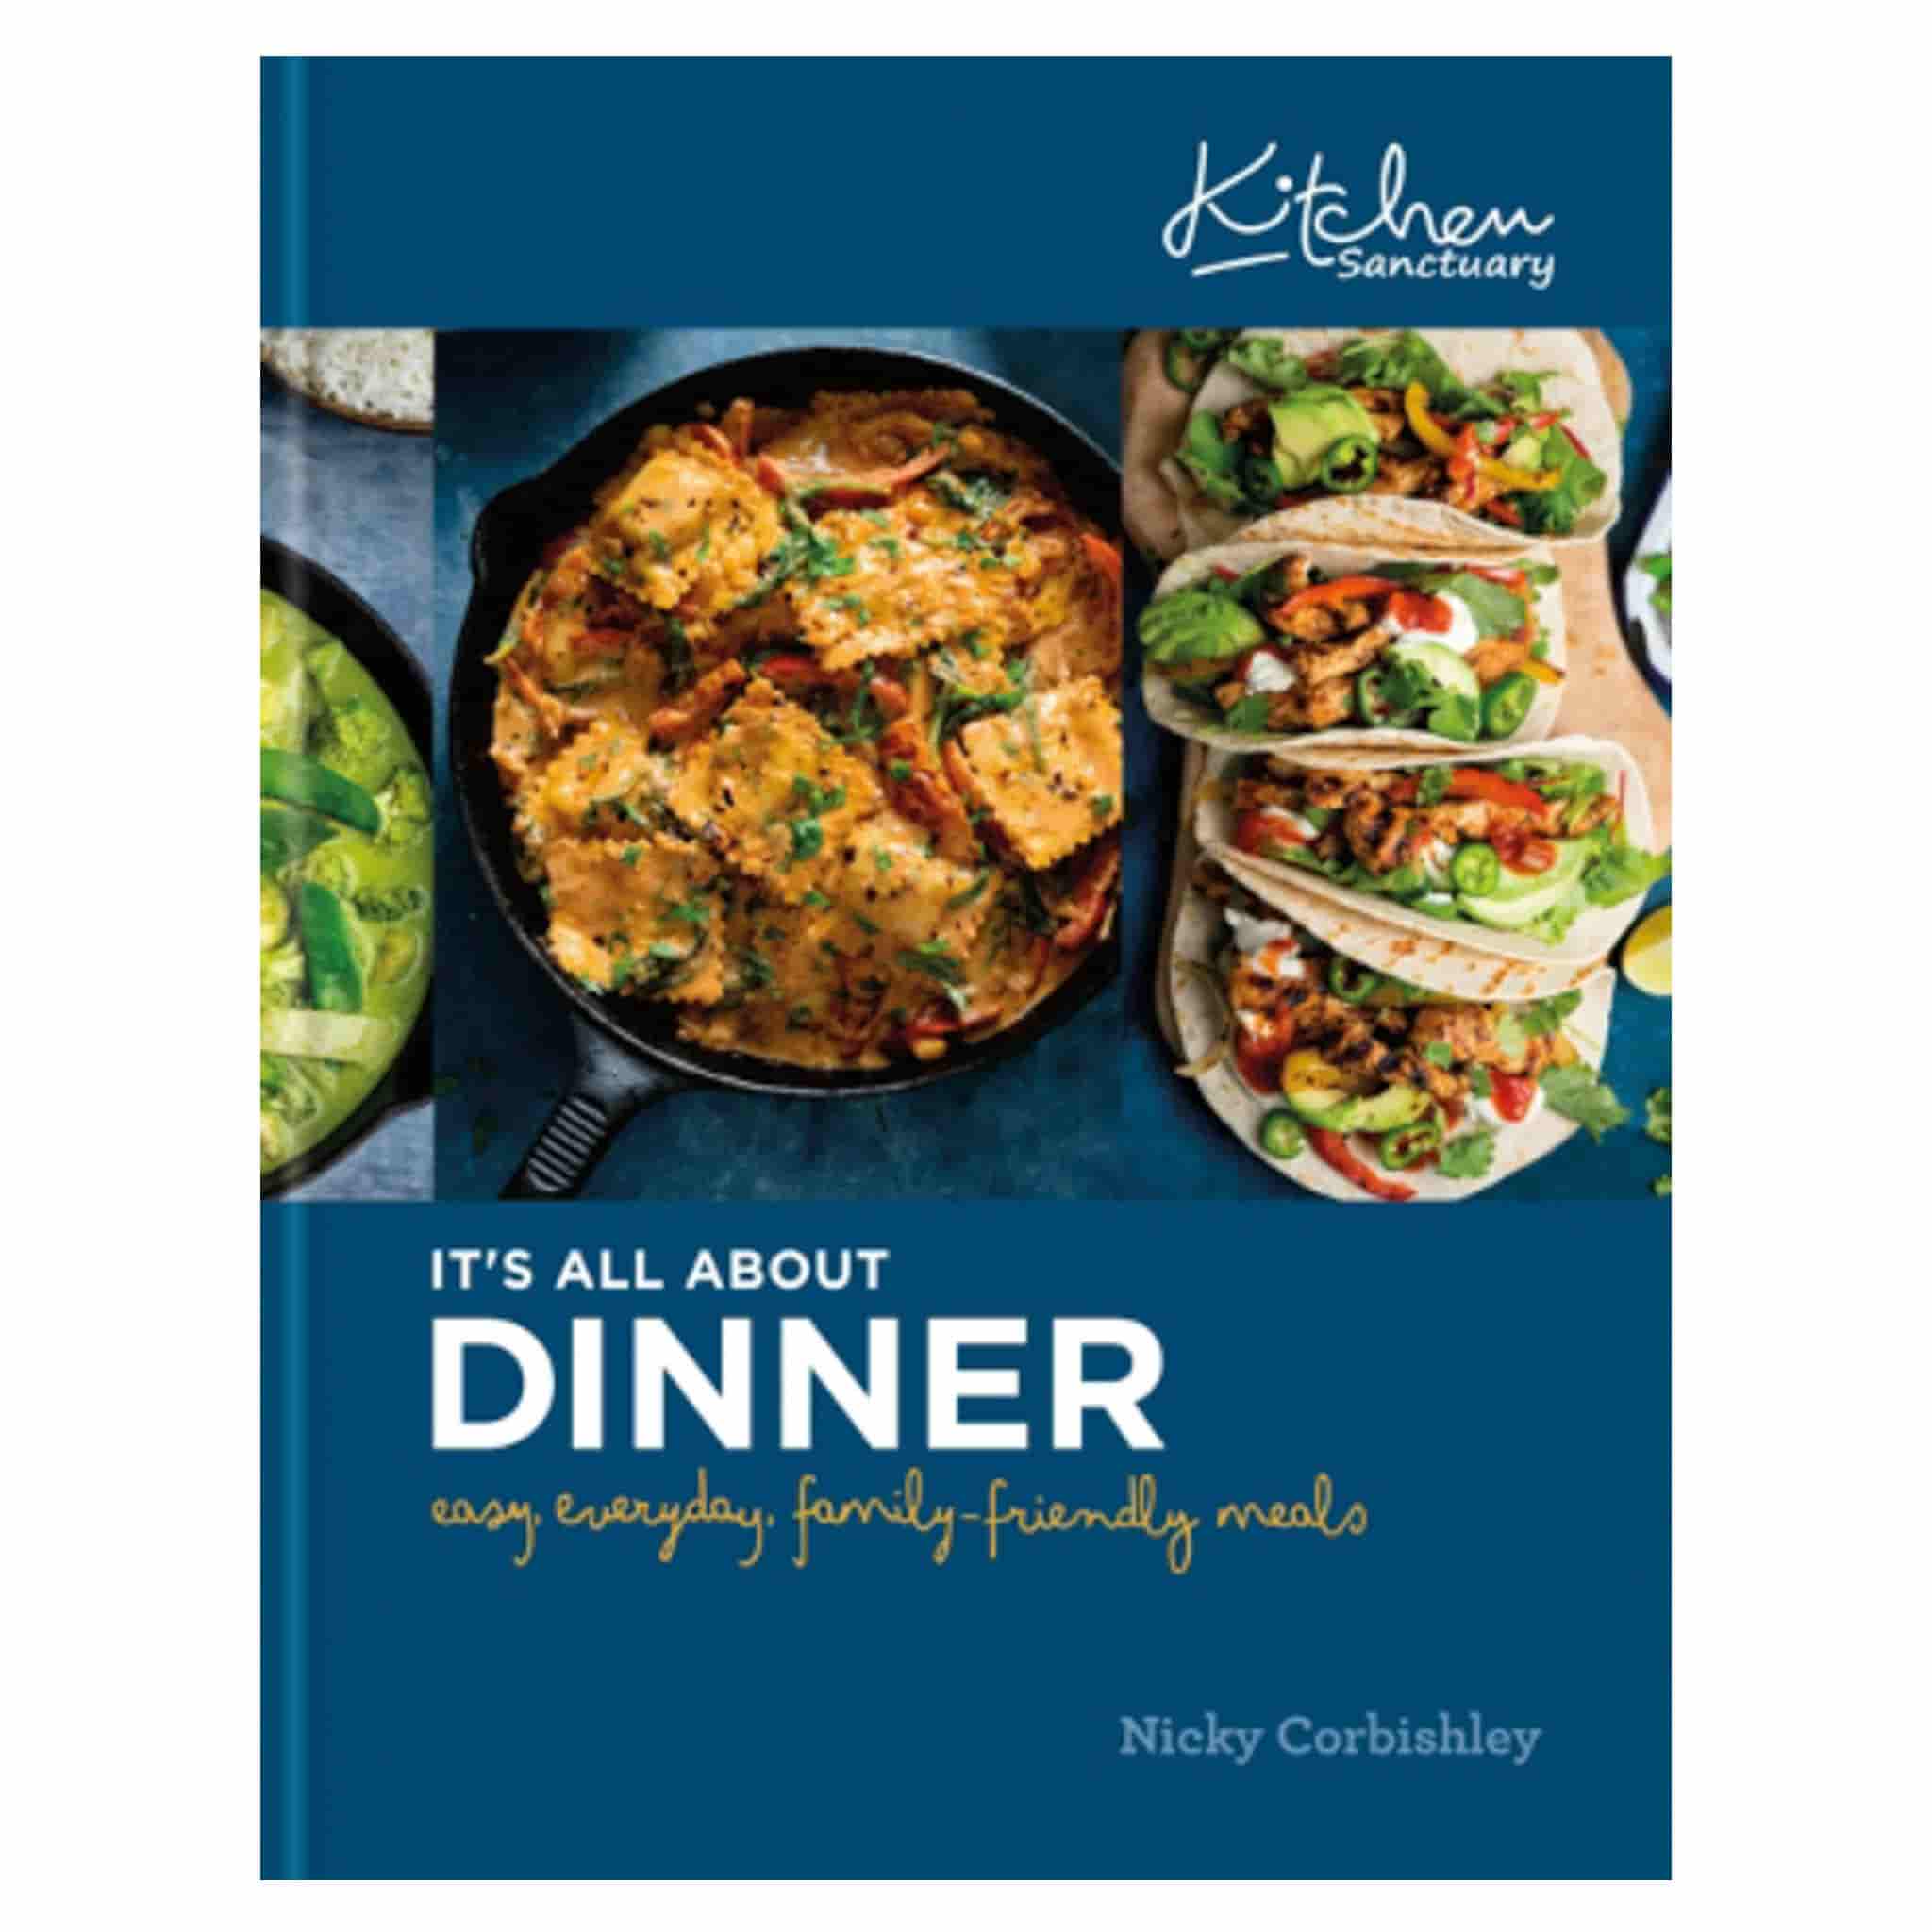 Kitchen Sanctuary: It's All About Dinner, by Nicky Corbishley